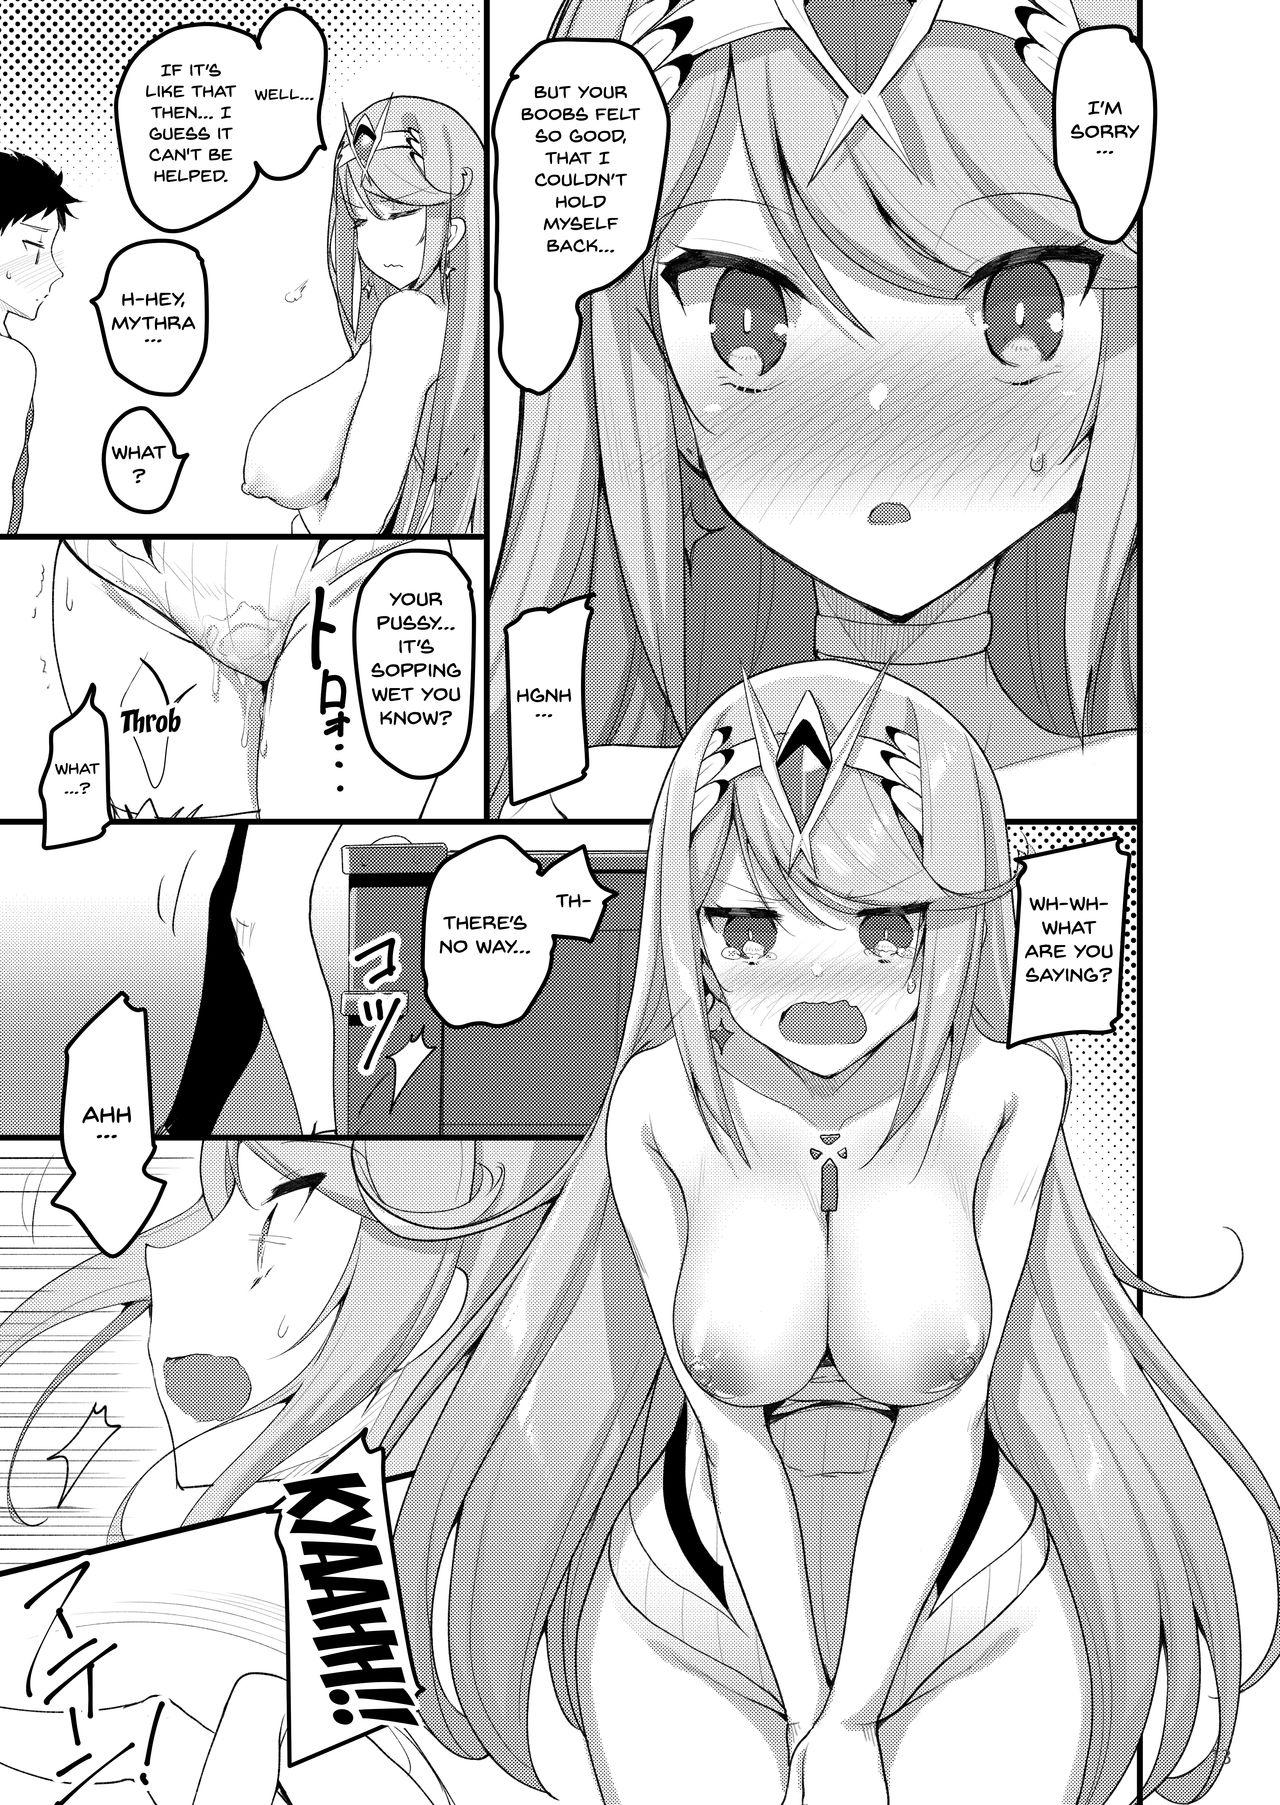 Uncensored Superbia no Amai Yoru 2 | Superbia's Sweet Night 2 - Xenoblade chronicles 2 Gay Orgy - Page 11